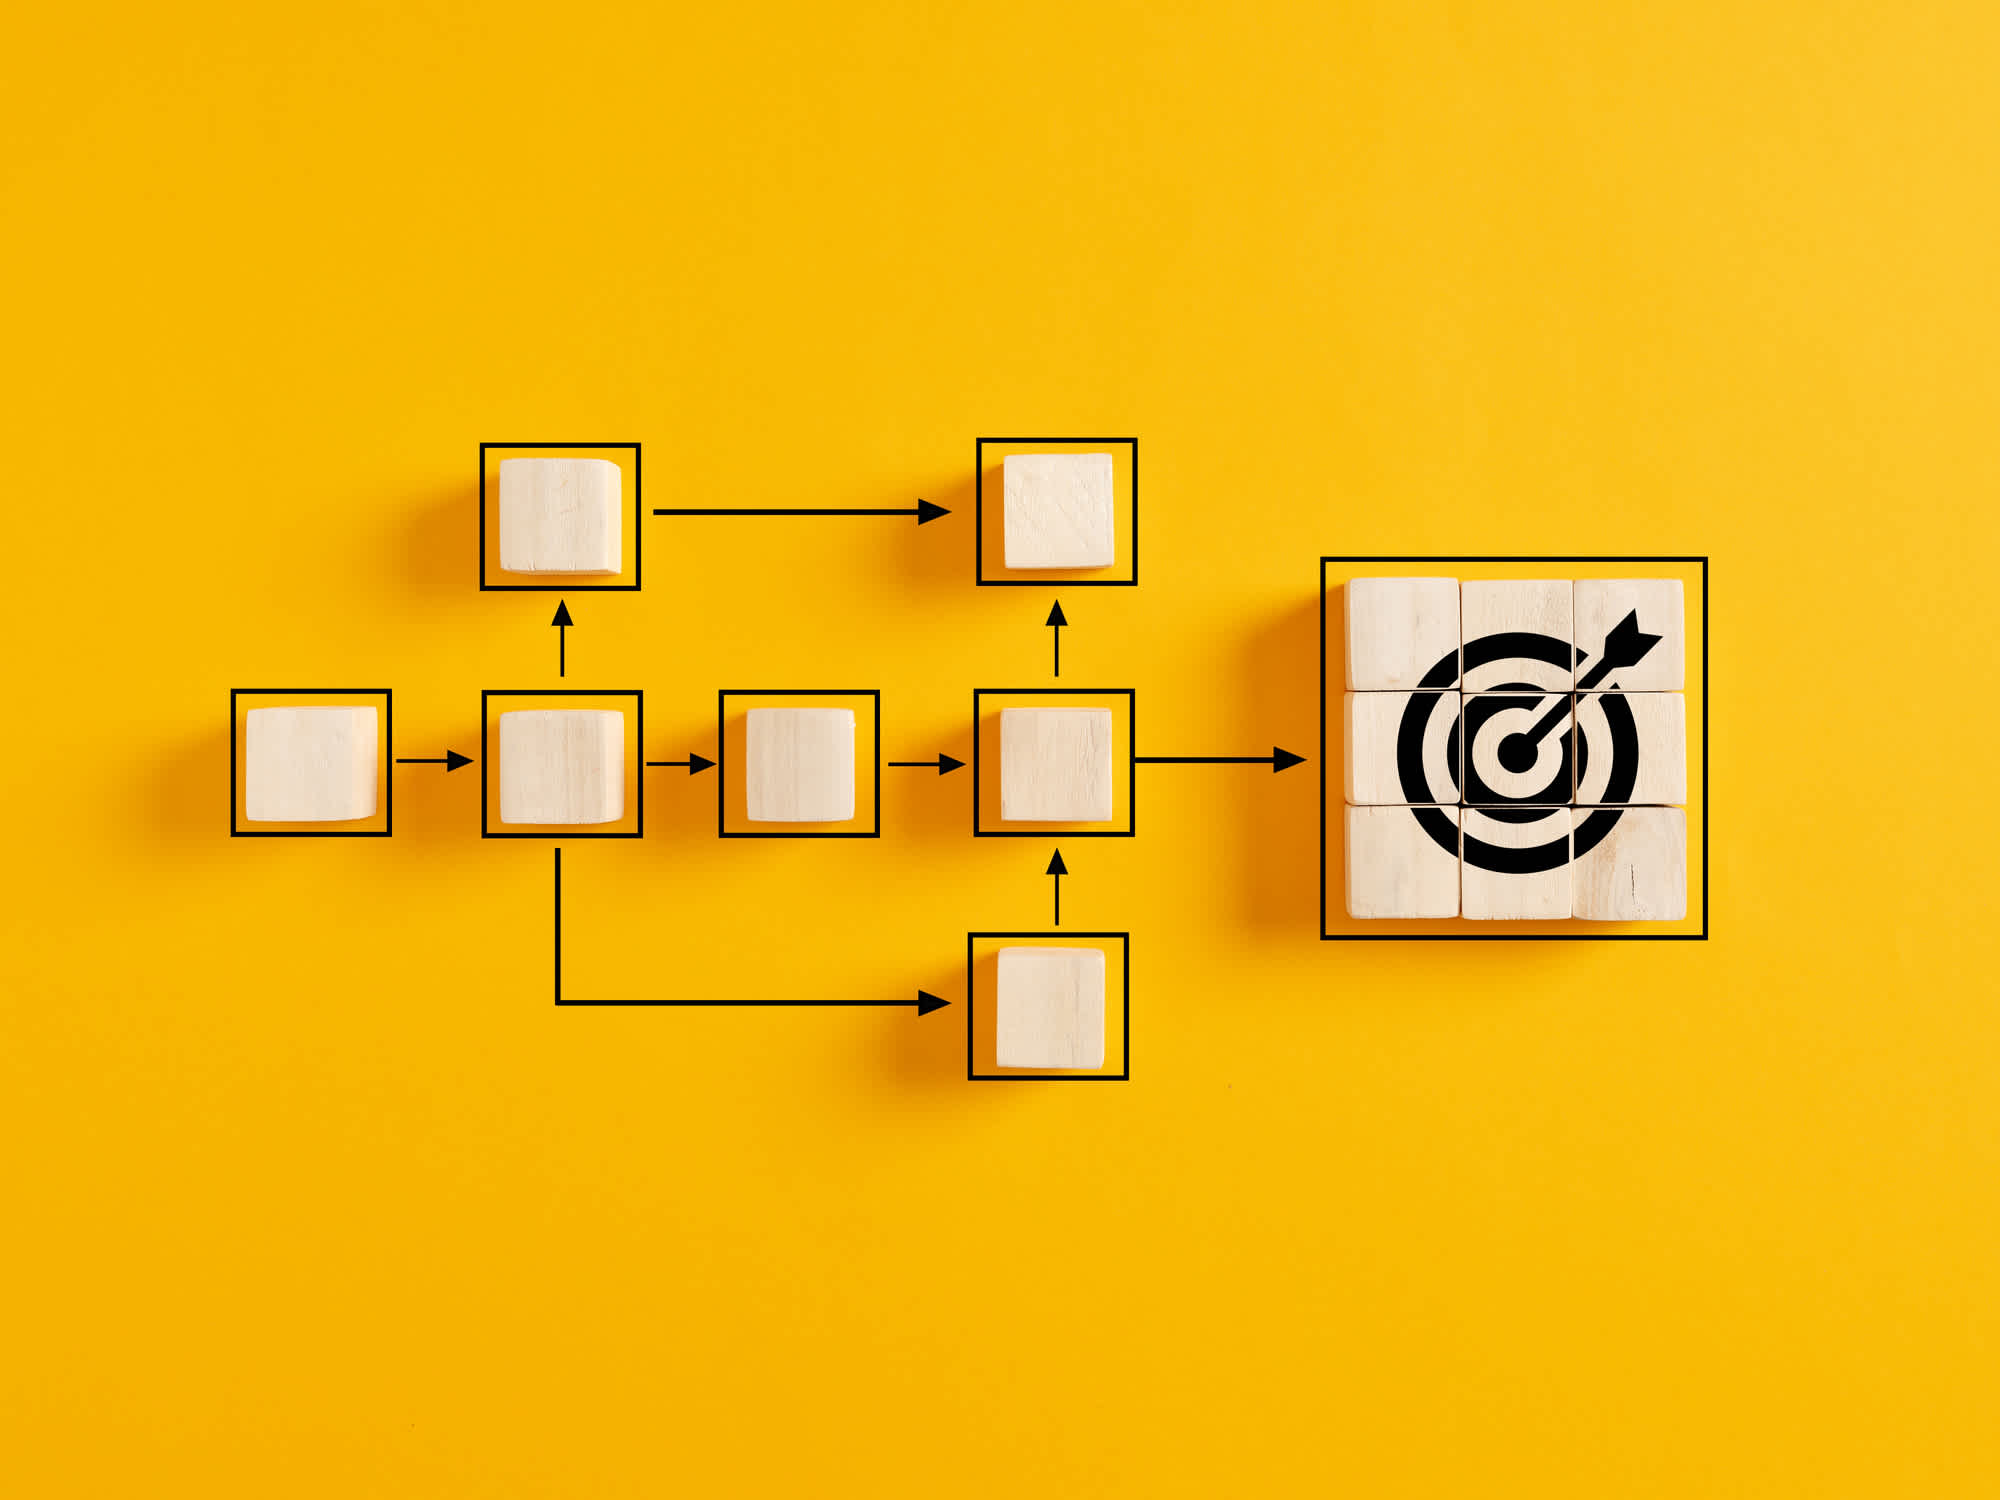 Business goal achievement, workflow, and process automation flowchart. Wooden cubes representing work process management and target icon on yellow background.| Watermark